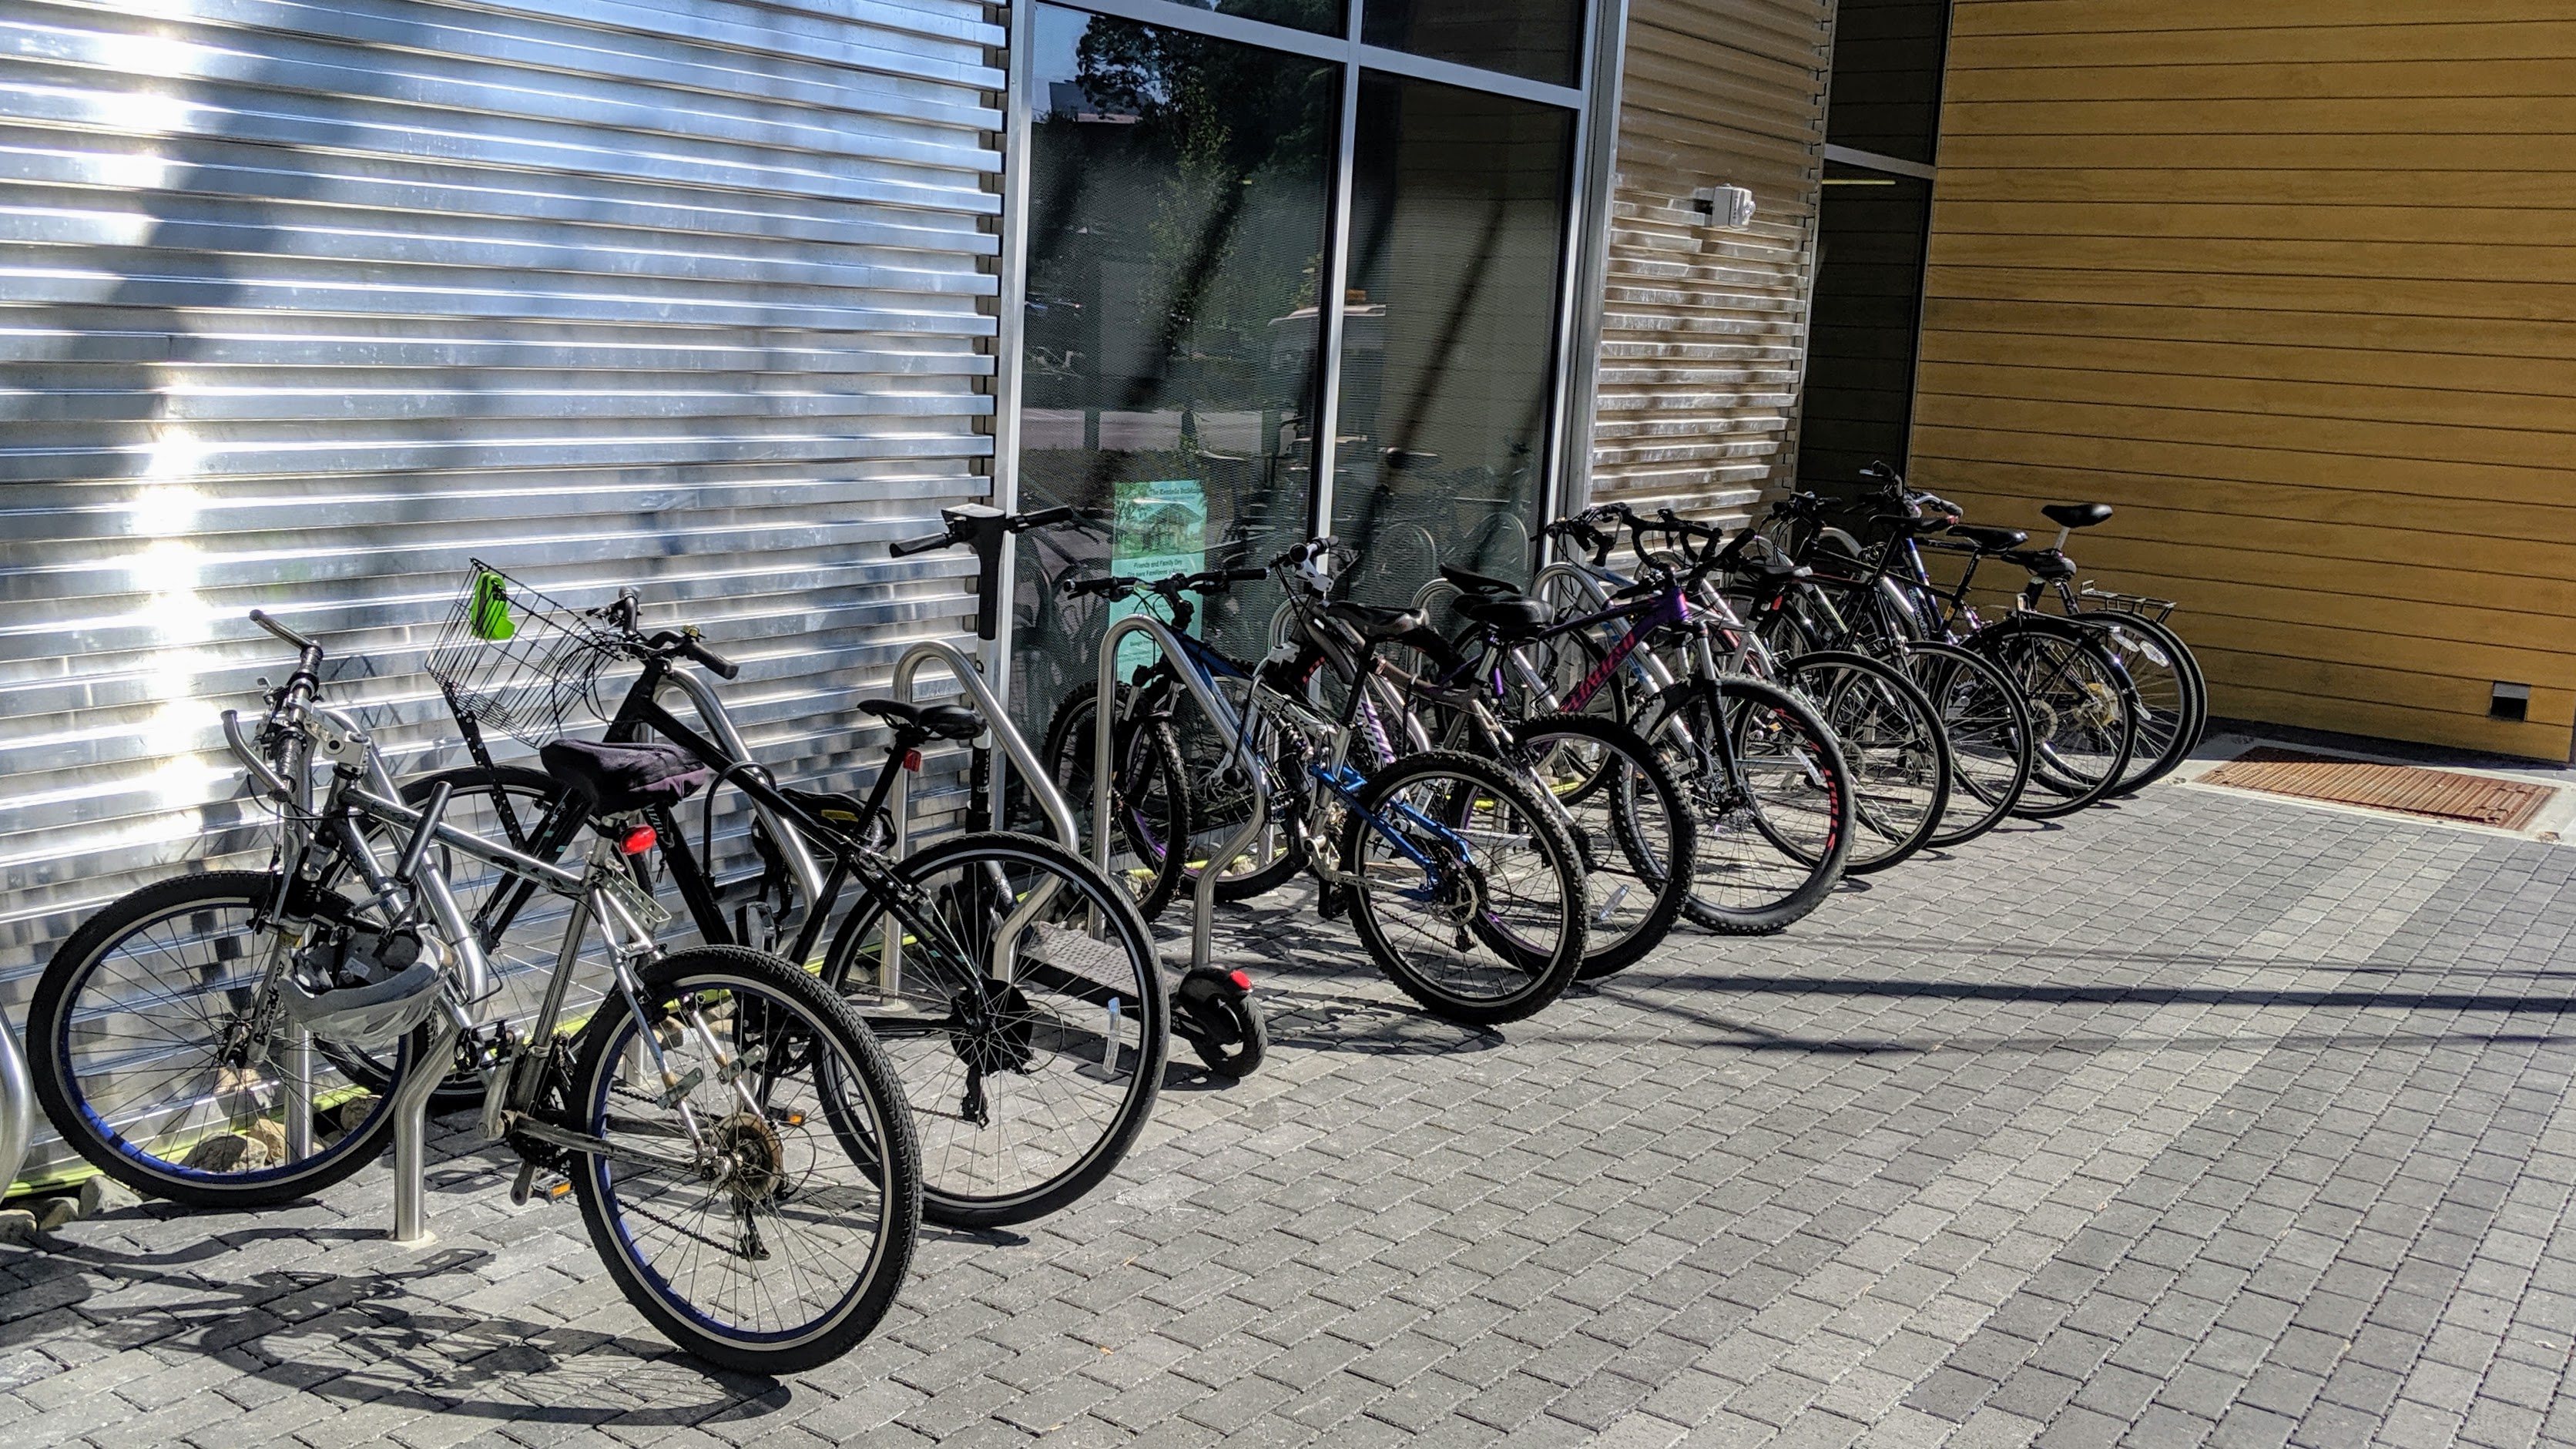 Fully utilized bike racks in front of the building.